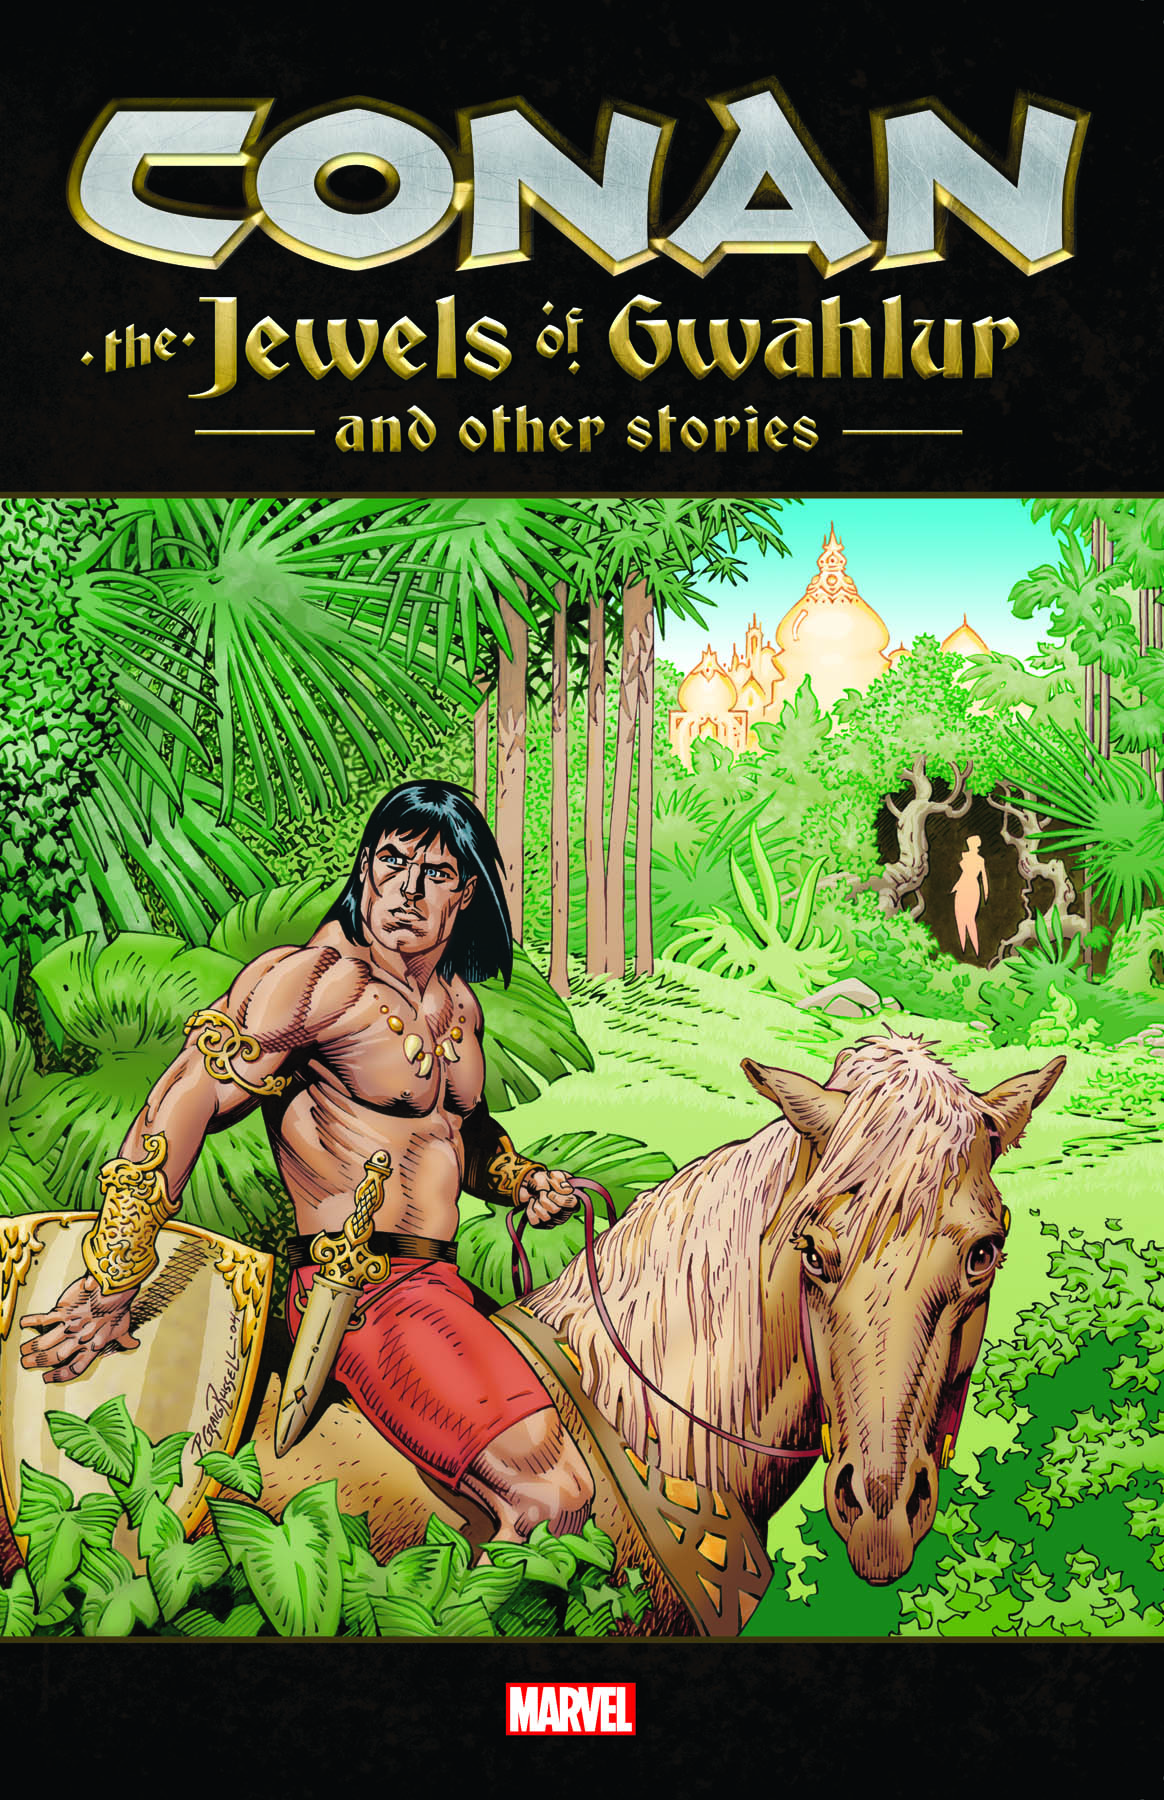 CONAN: THE JEWELS OF GWAHLUR AND OTHER STORIES TPB (Trade Paperback)